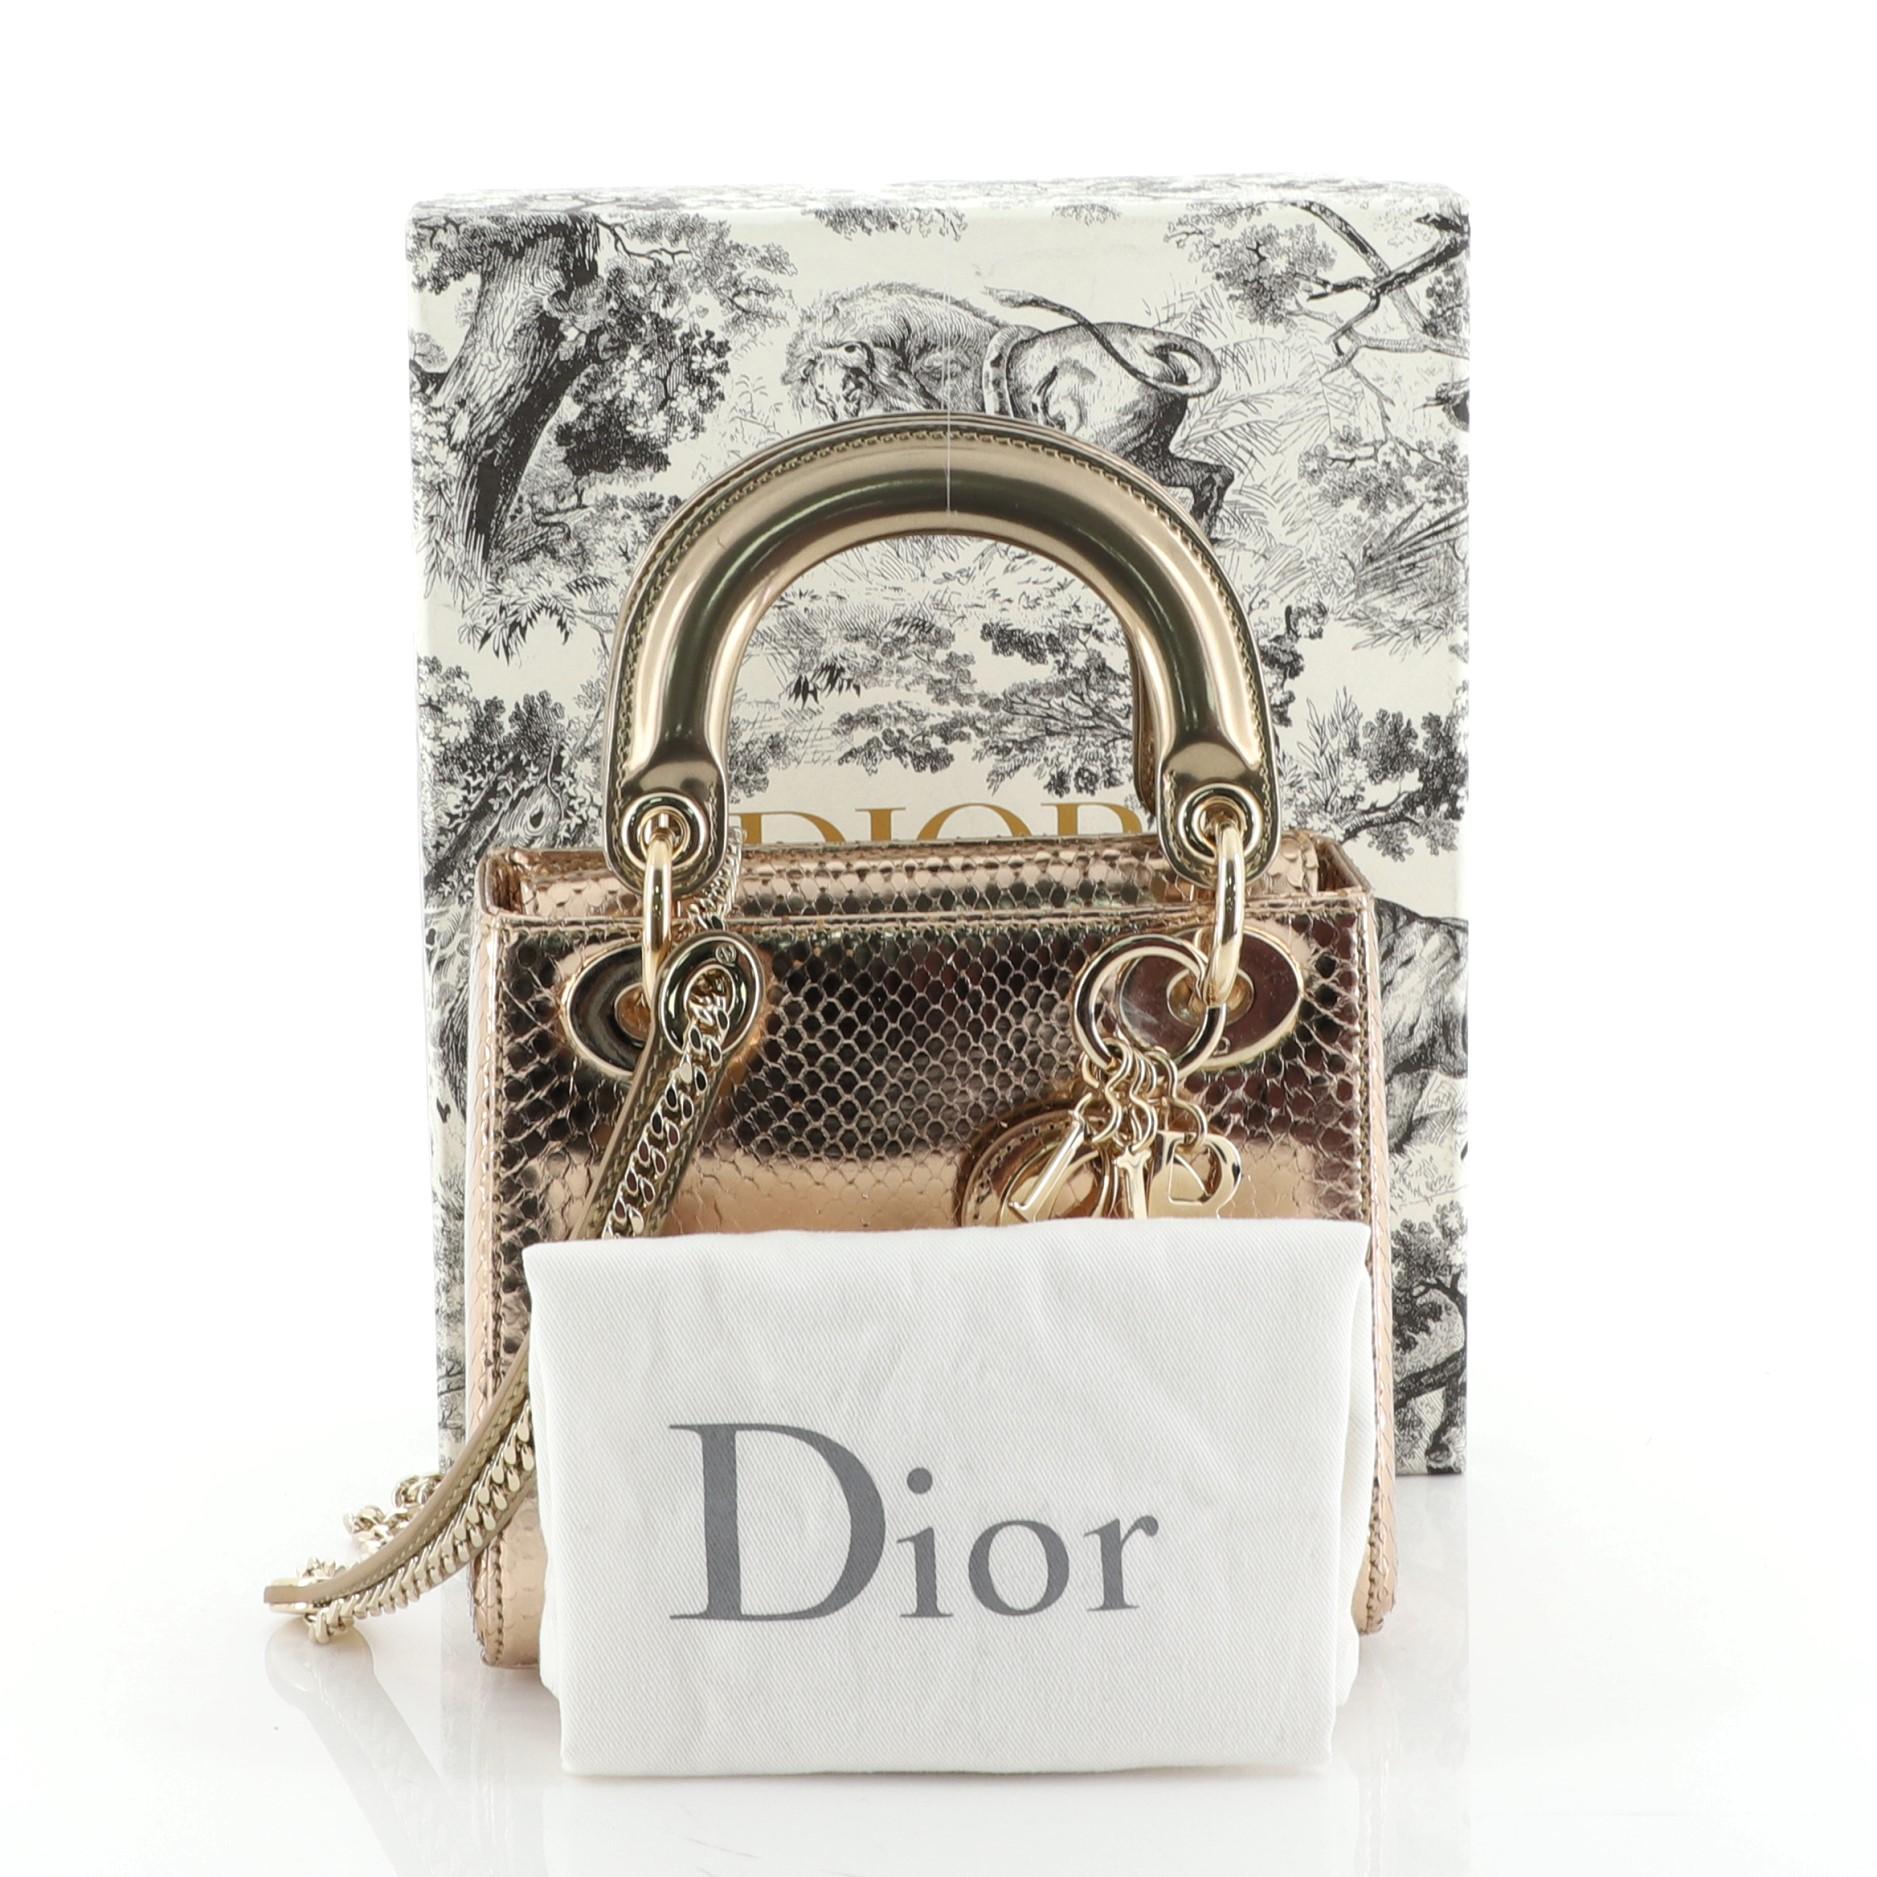 This Christian Dior Lady Dior Bag Python Mini, crafted in genuine gold python, features dual top leather handles, Dior charms, and gold-tone hardware. It opens to a pink leather interior with side zip pocket. This item can only be shipped within the